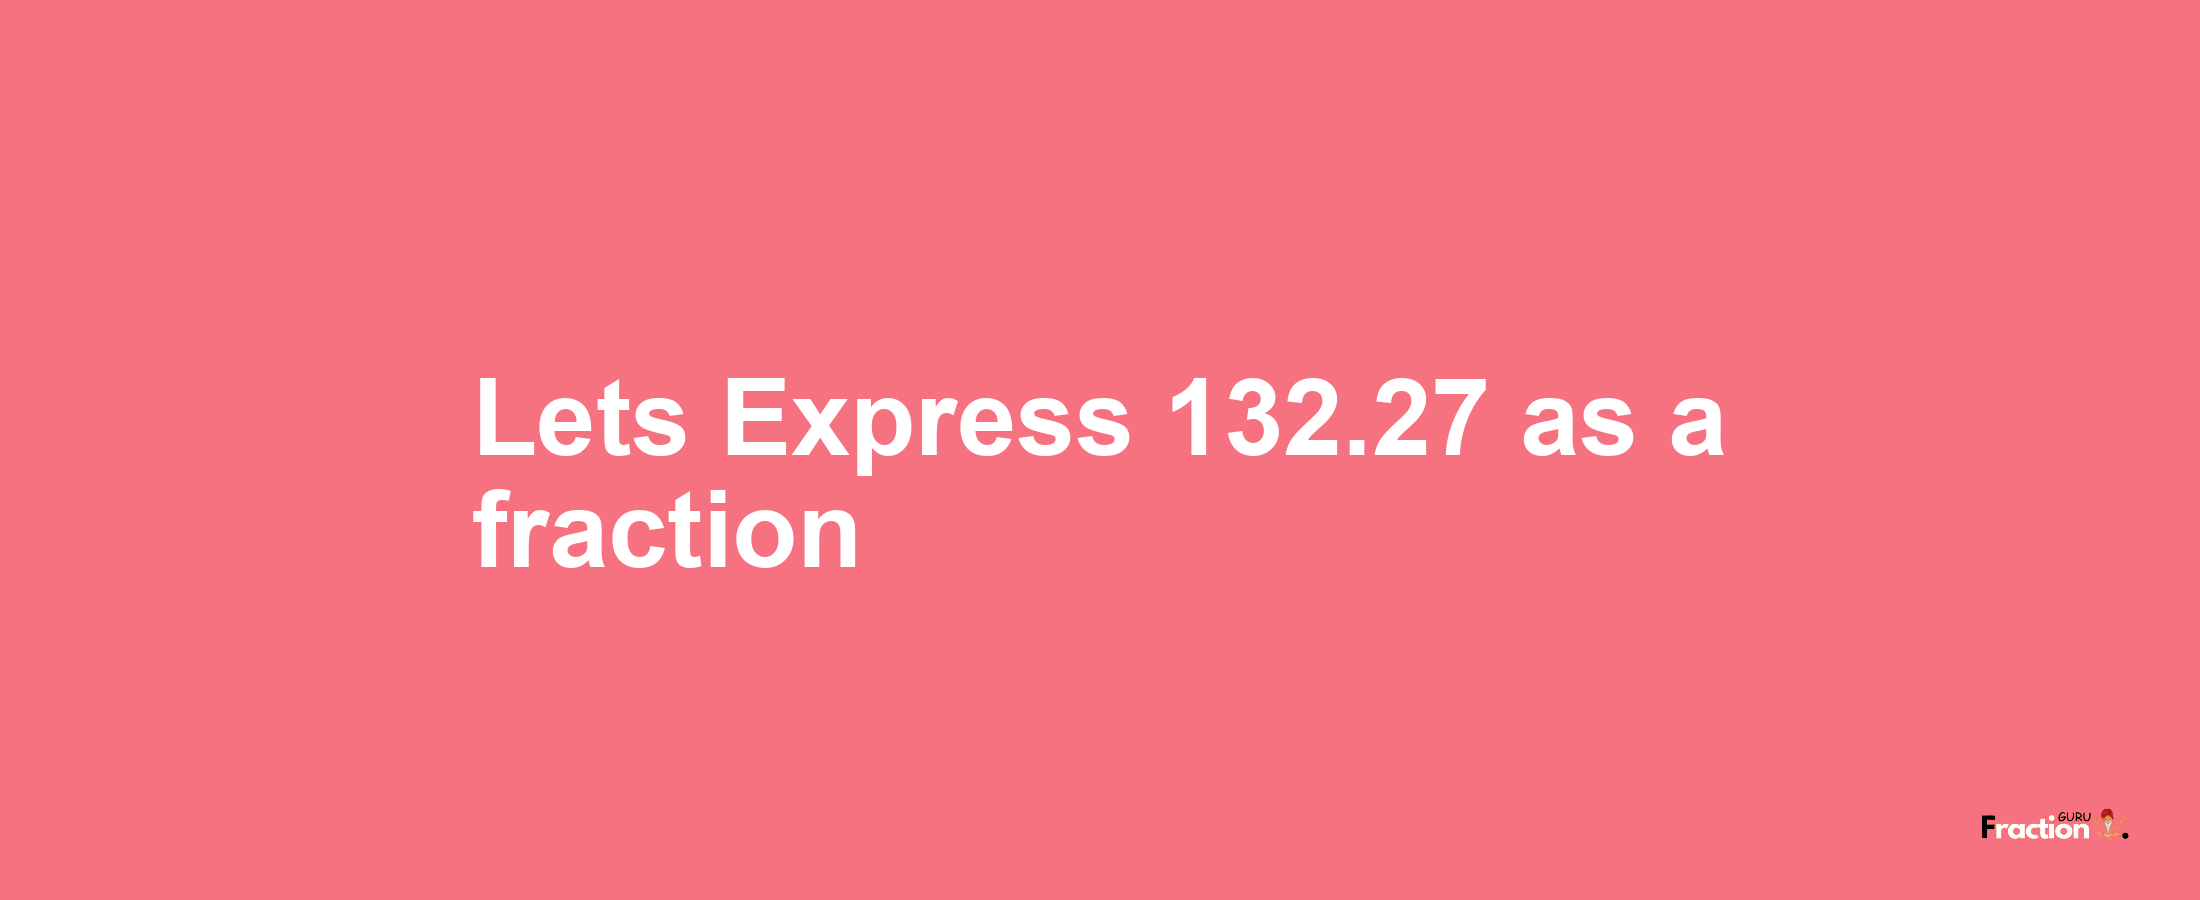 Lets Express 132.27 as afraction